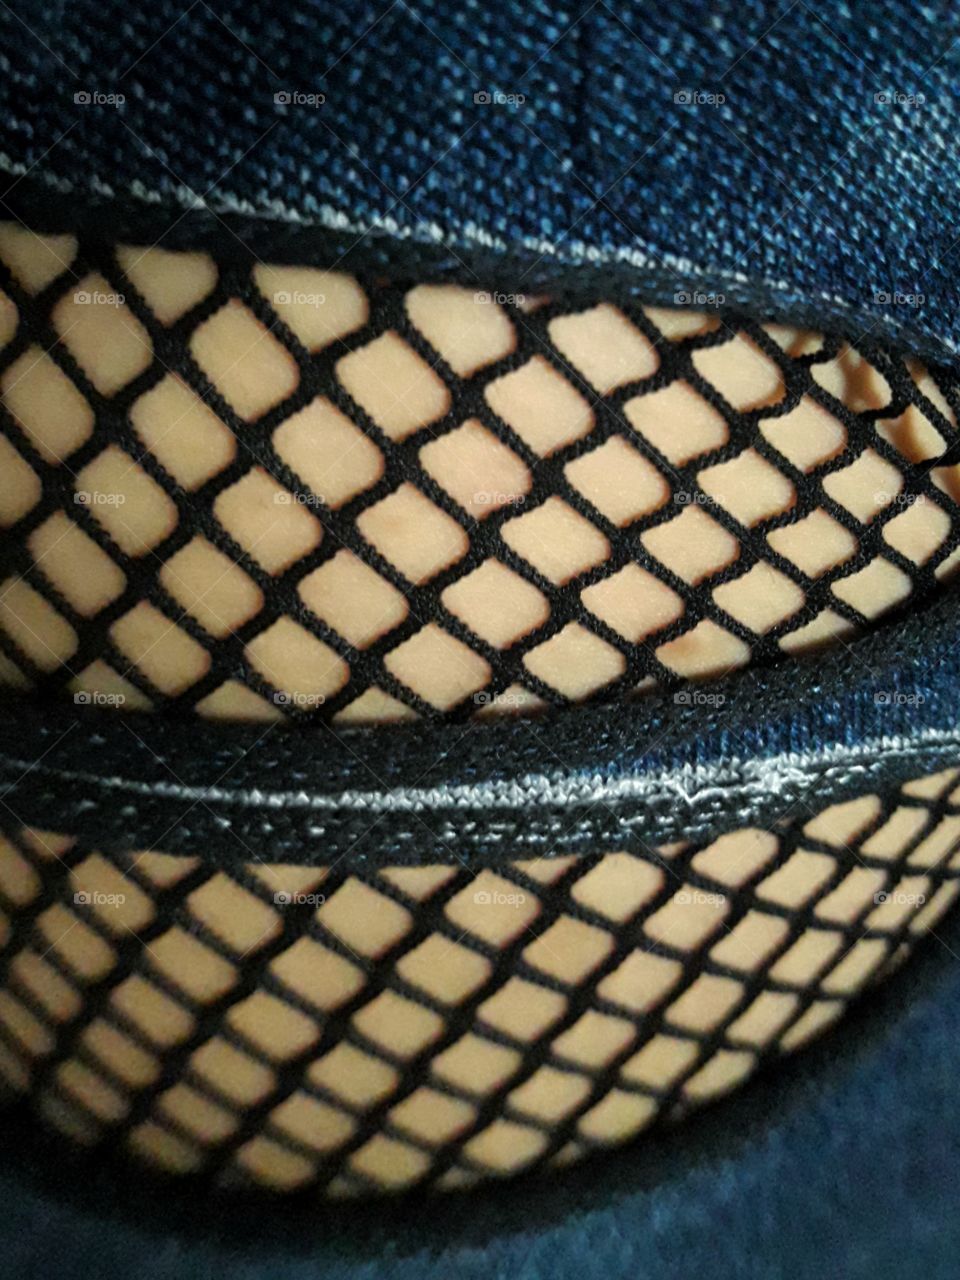 jeans with fishnet stockings underneath